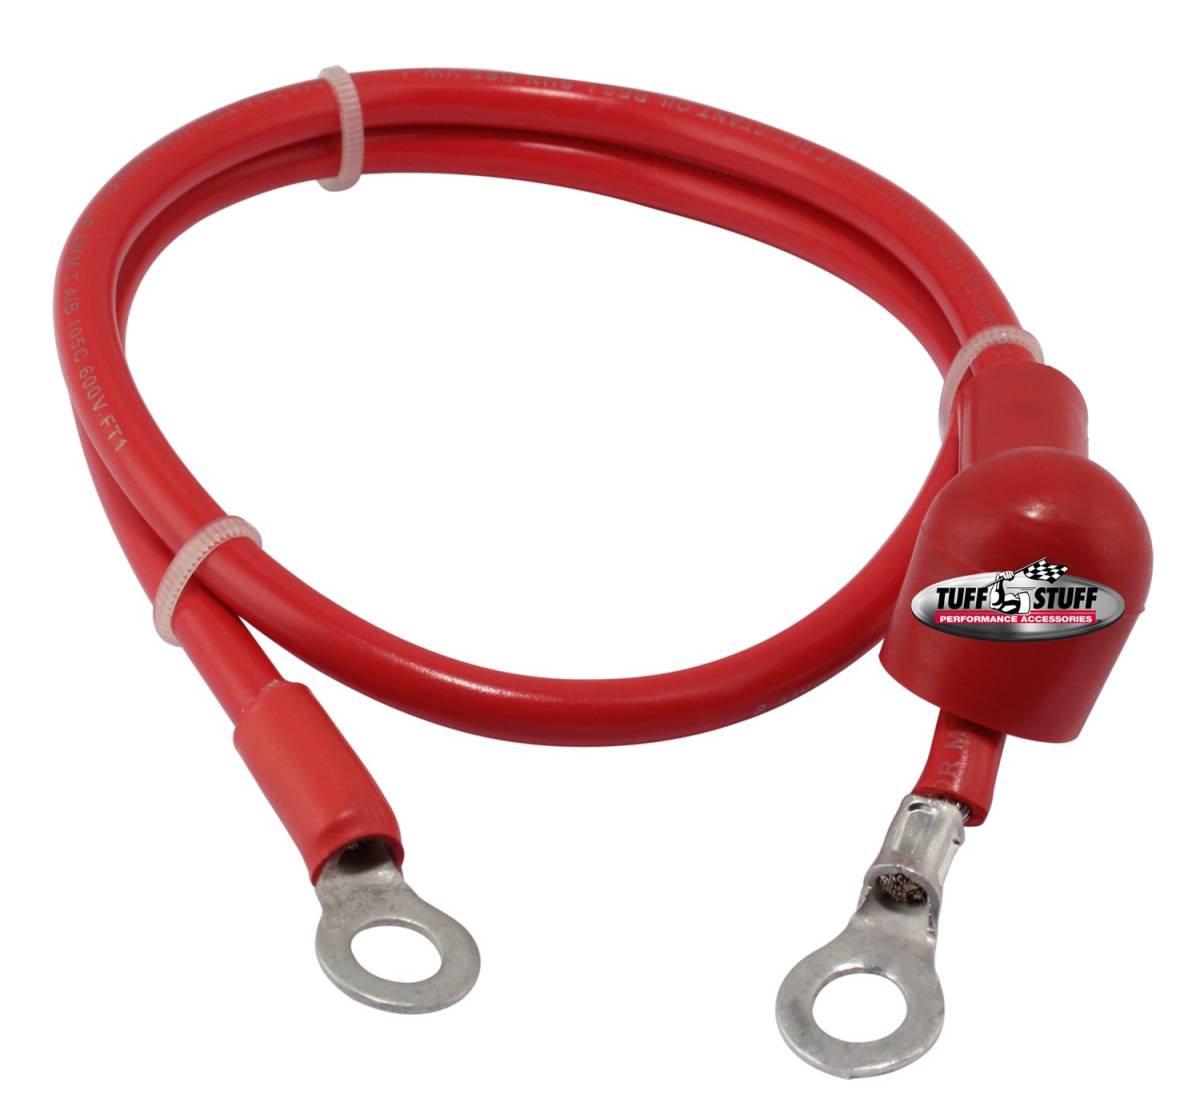 Tuff Stuff Performance - Alternator Replacement Heavy Duty Charge Wires Universal 1 Wire 8 Gauge Copper Terminated 36 in. Long Red 754636